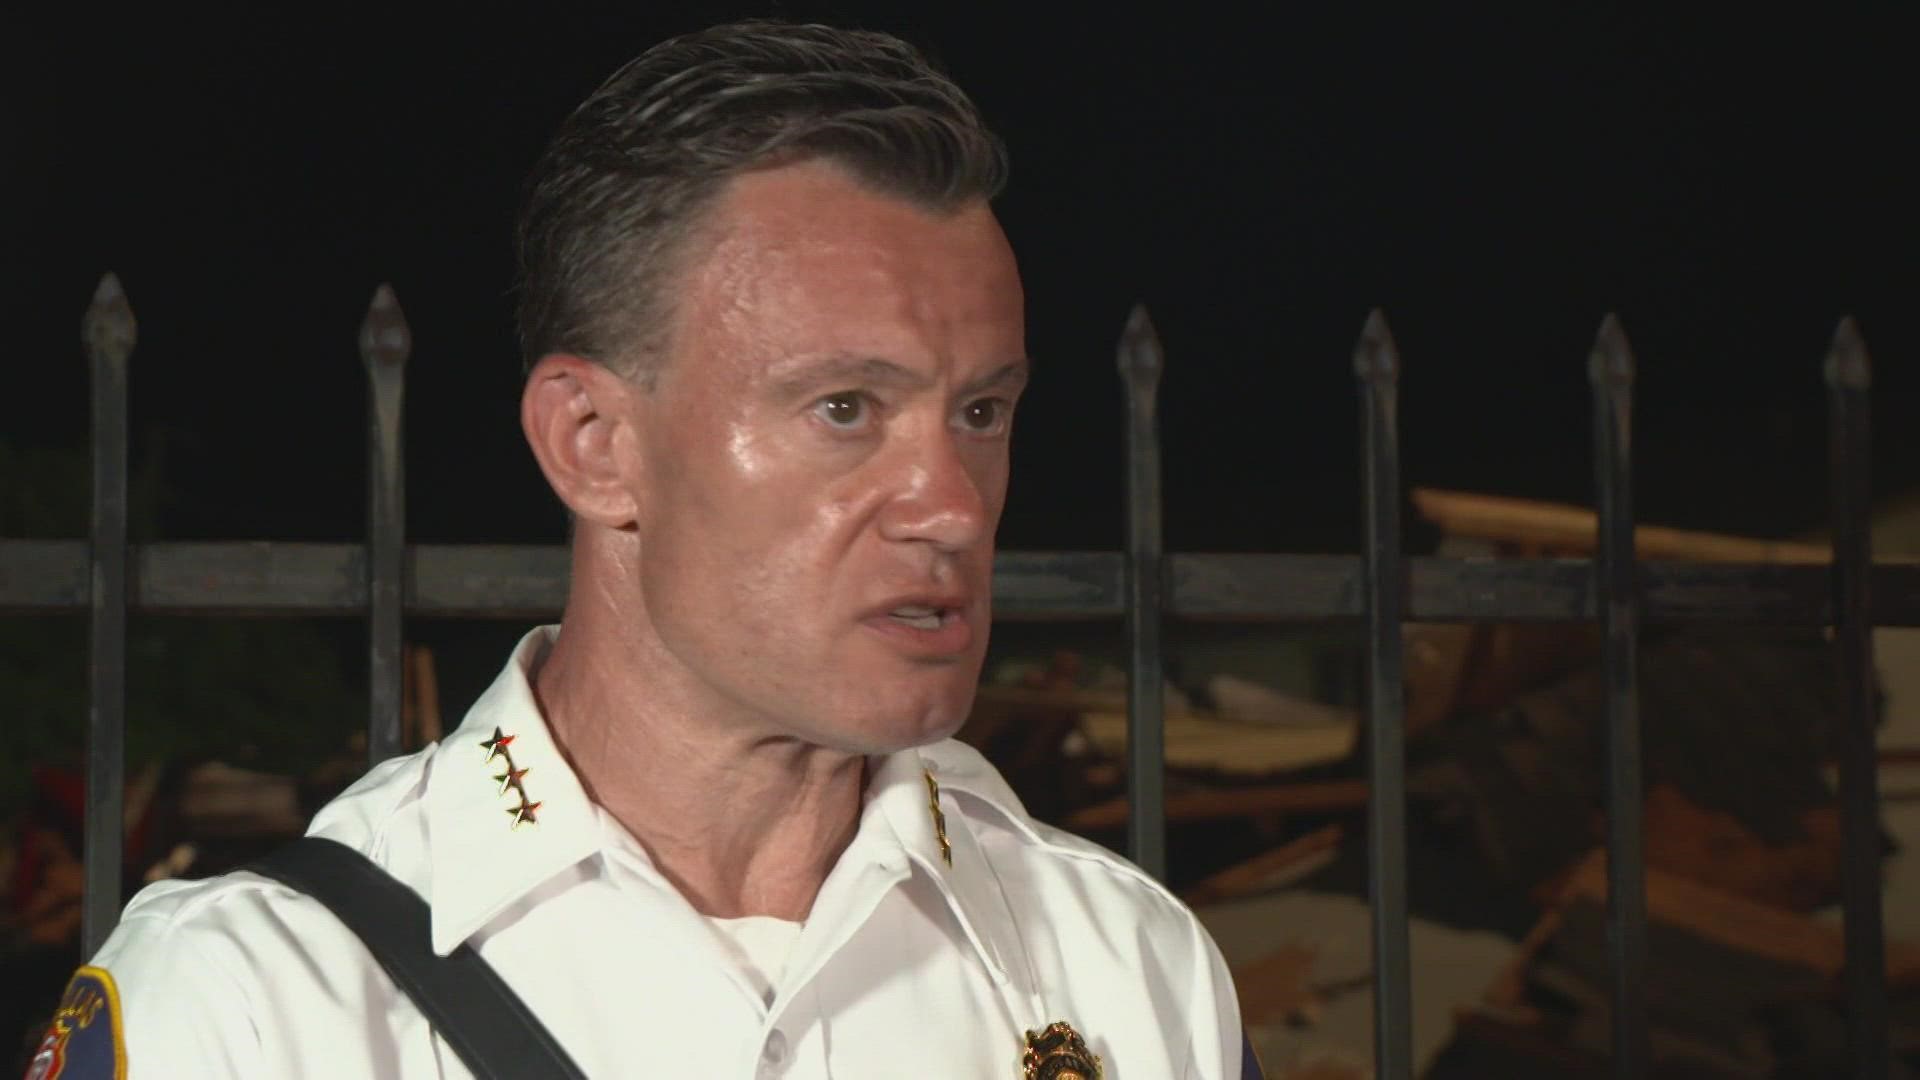 Dallas Fire-Rescue Assistant Chief Ball said the department believes it was an isolated incident, but the investigation is ongoing.